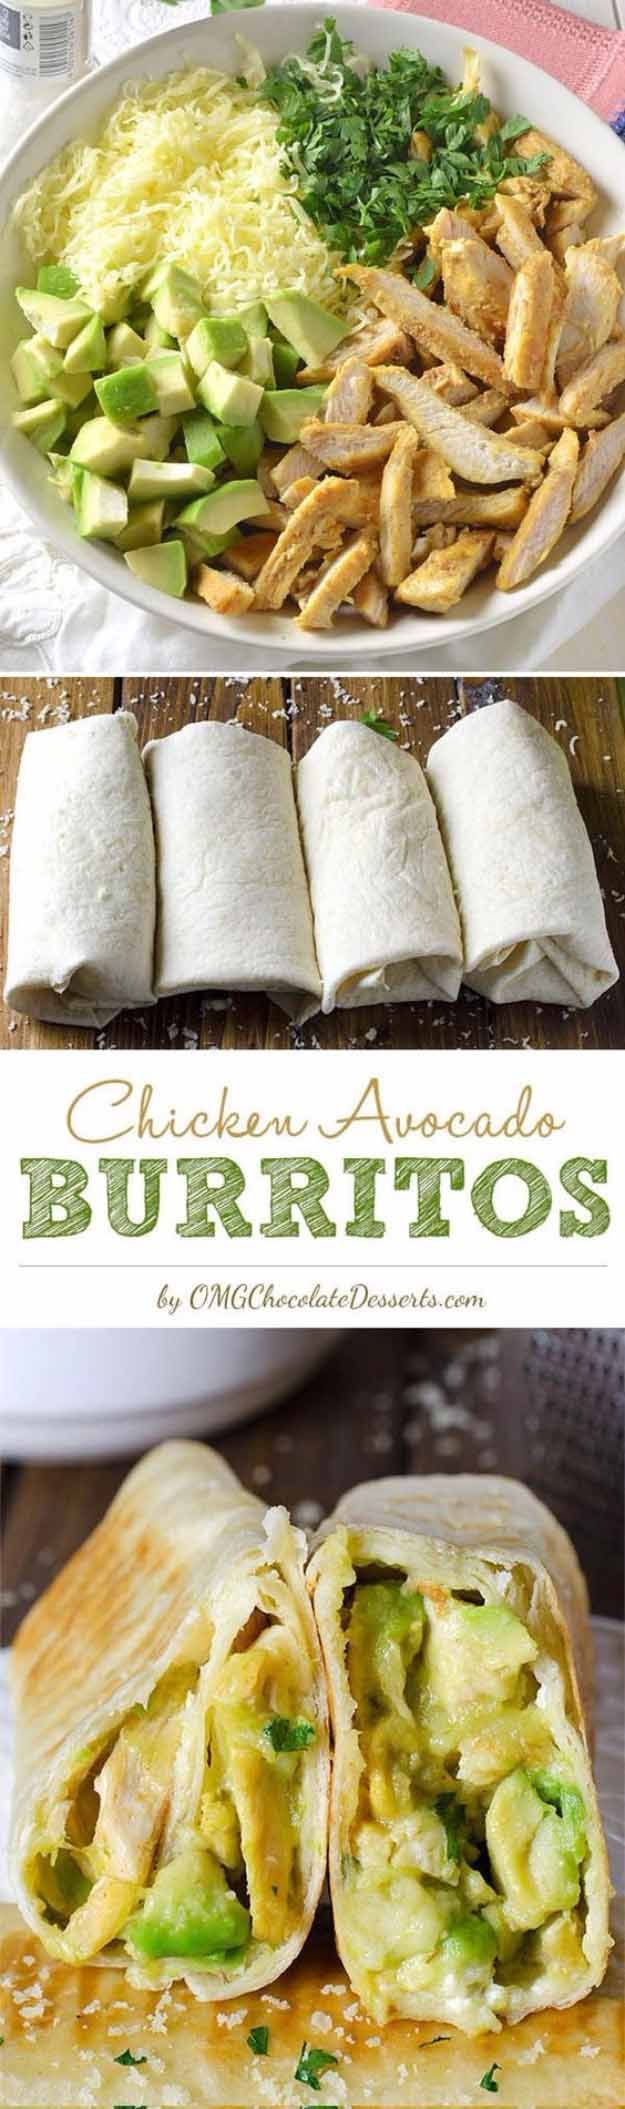 Quick and Easy Healthy Dinner Recipes – Chicken Avocado Burritos- Awesome Recipes For Weight Loss – Great Receipes For One, For